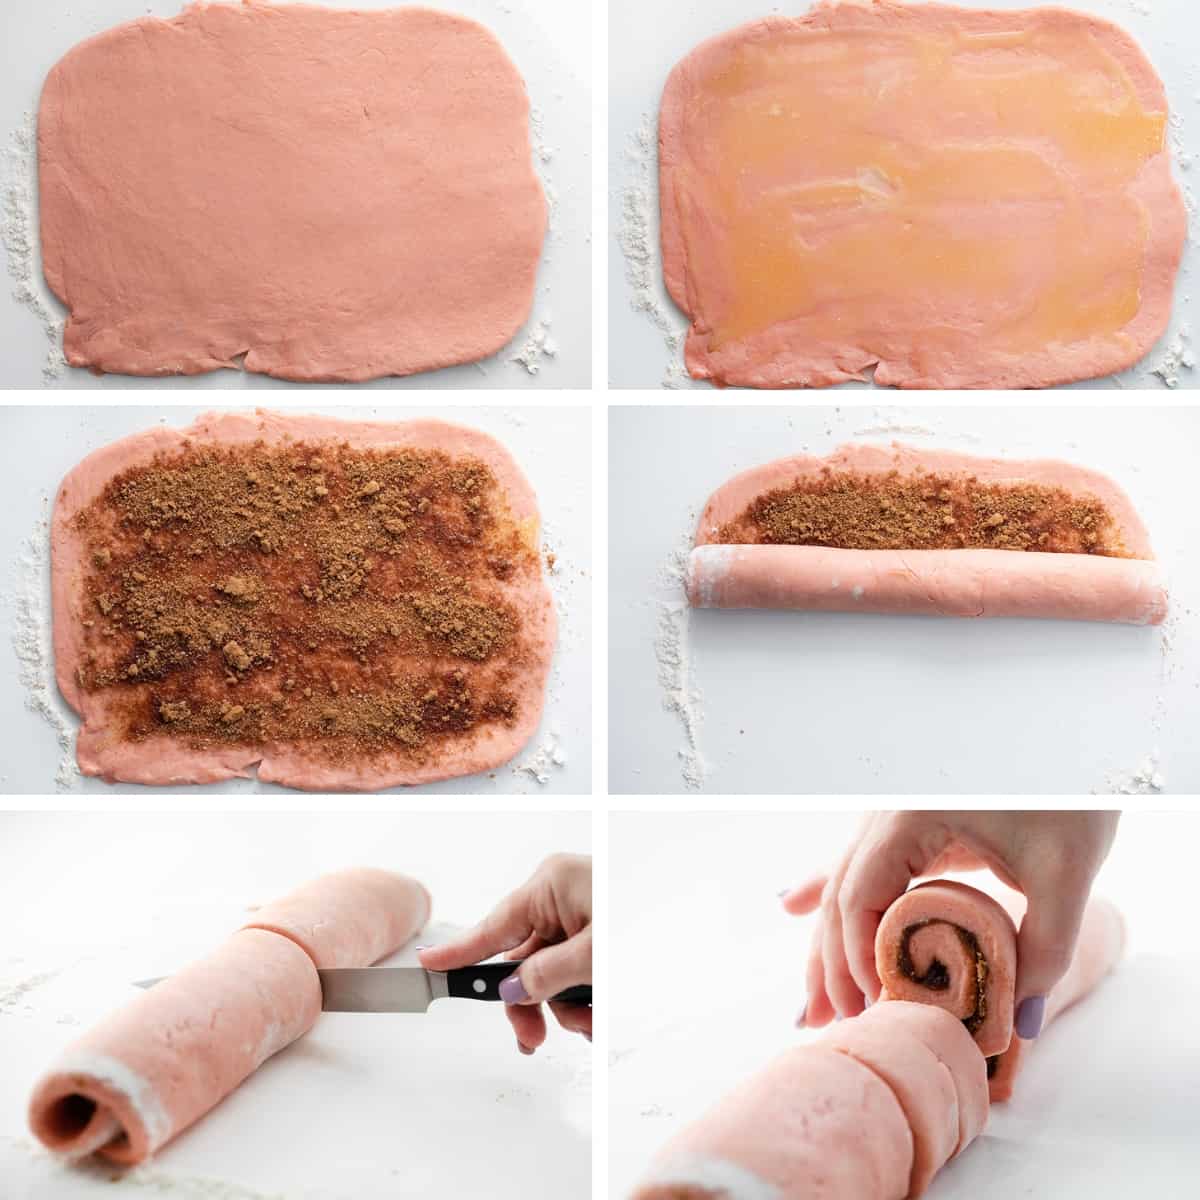 Steps for making pink cinnamon rolls with melted butter, cinnamon filling, rolling, and cutting rolls.